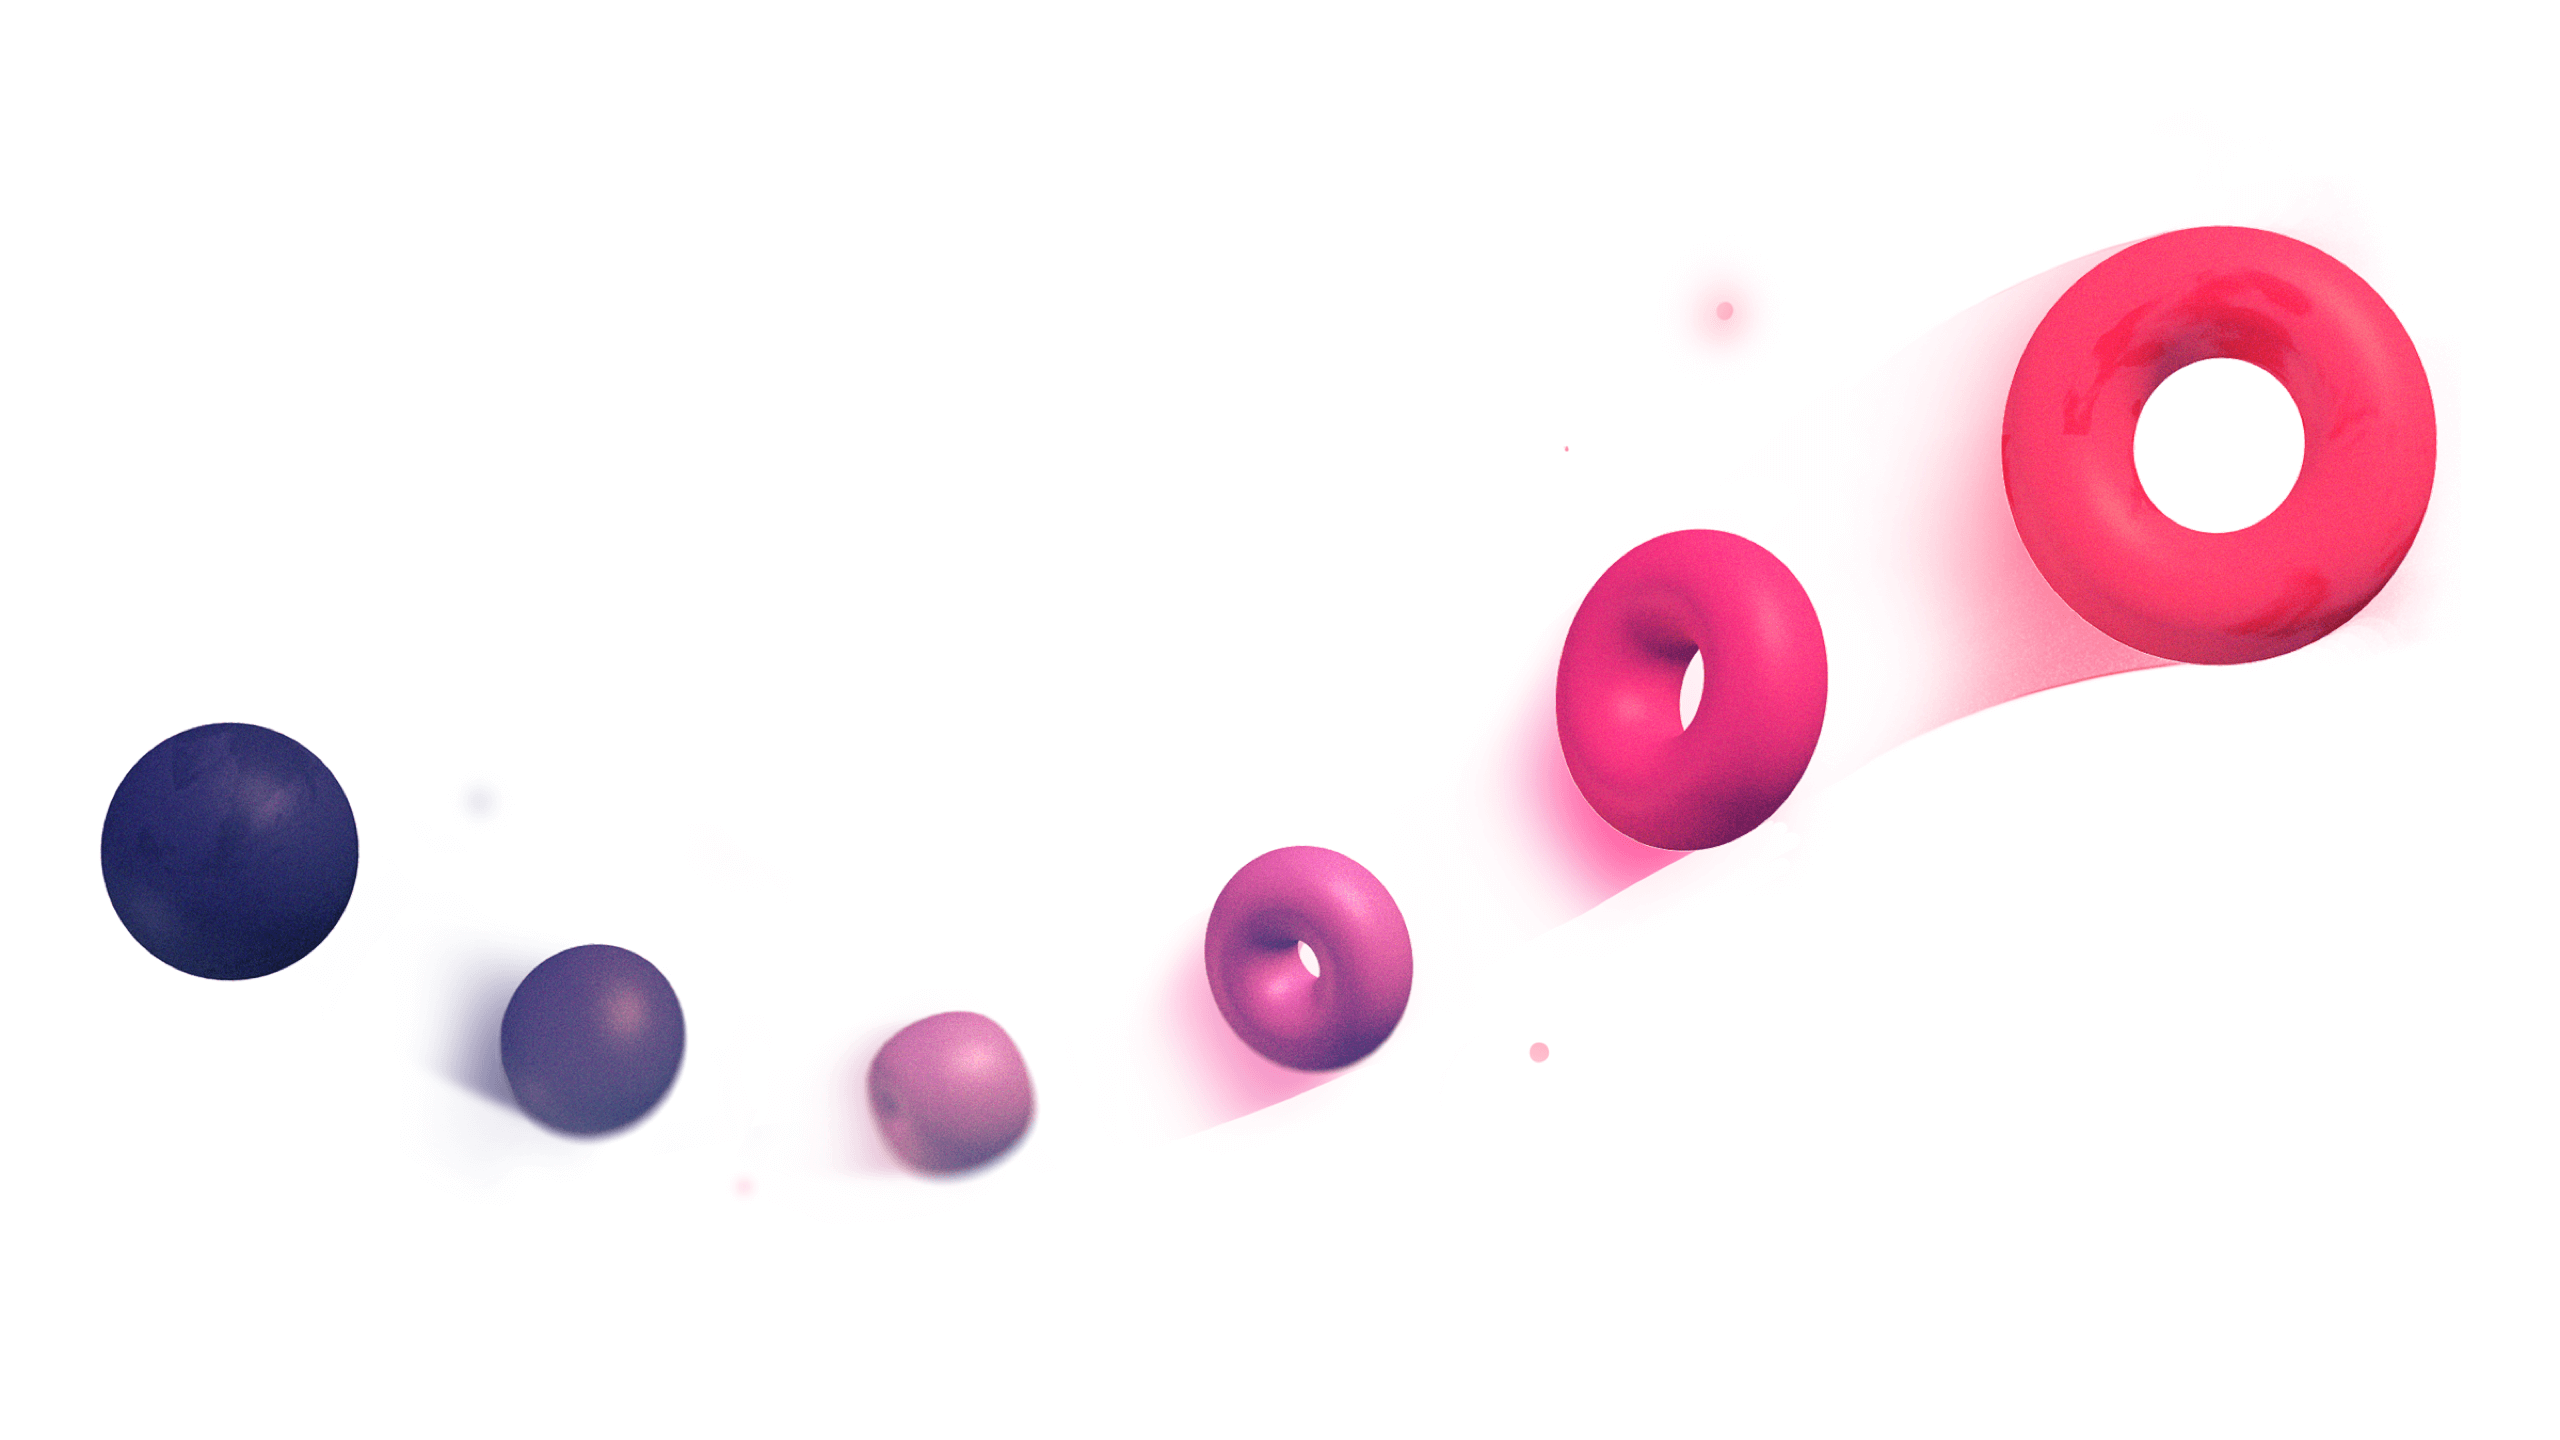 abstract illustration of sphere morphing into ring, stop motion style